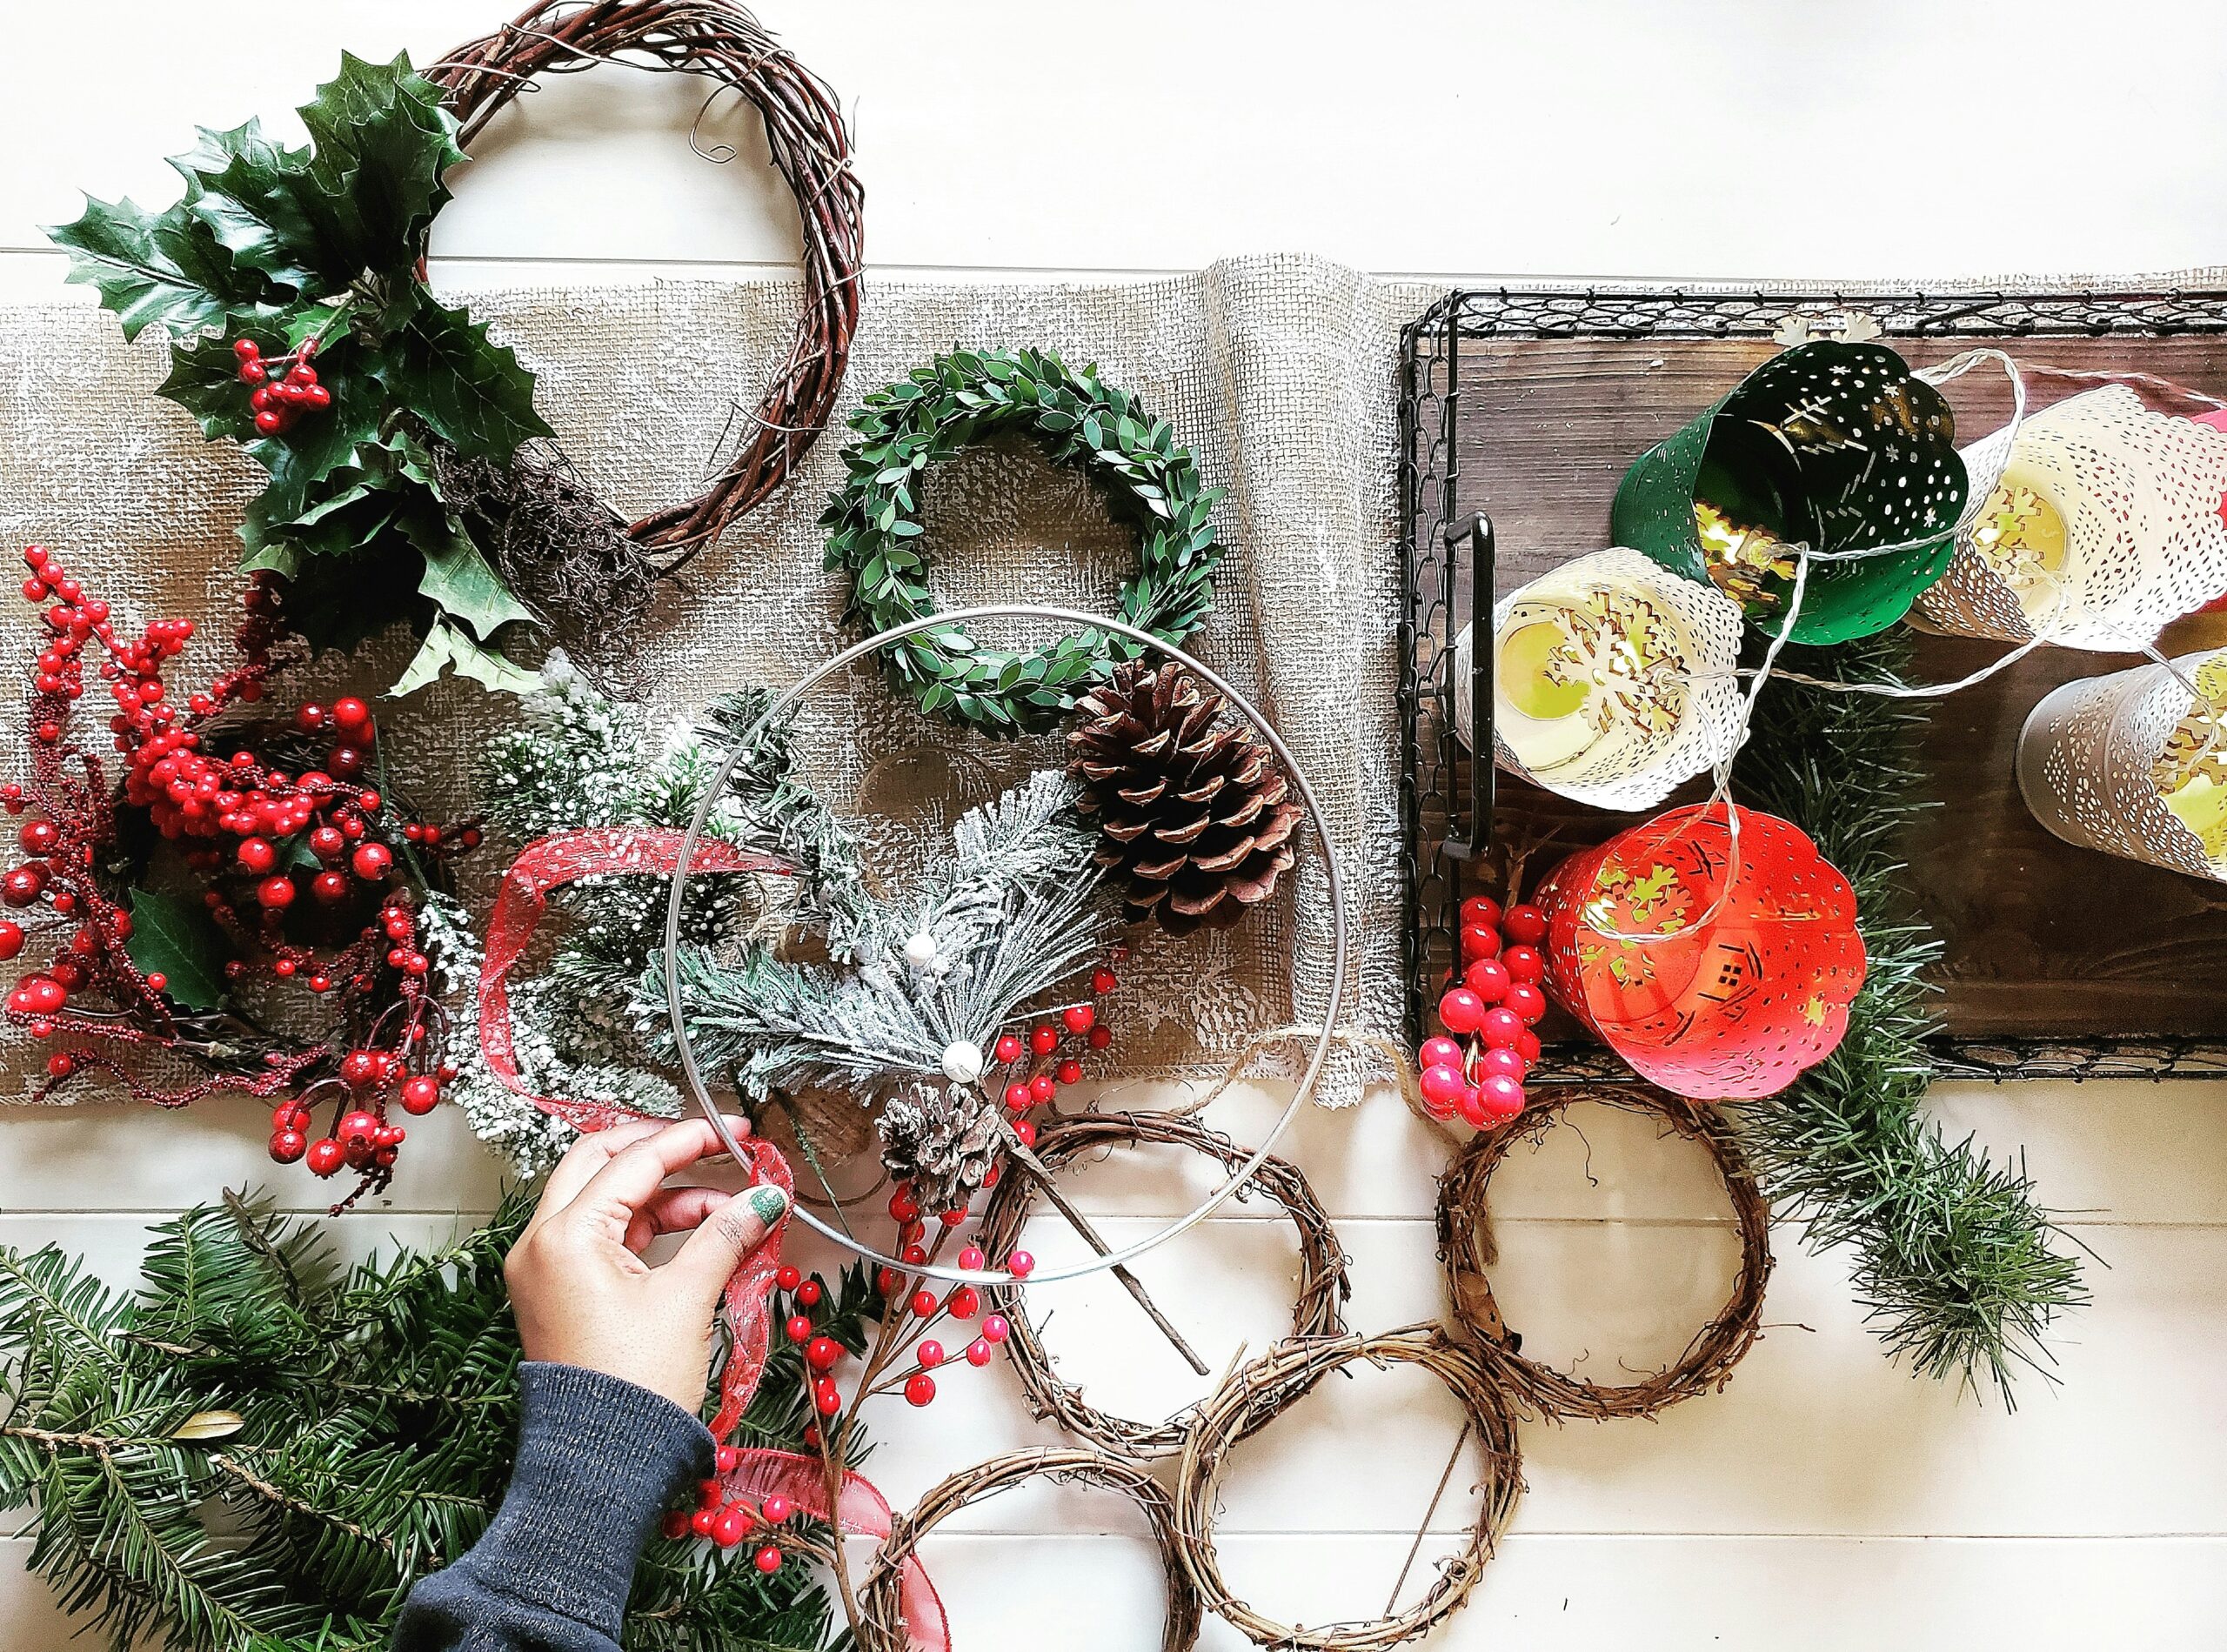 A person making a holiday wreath